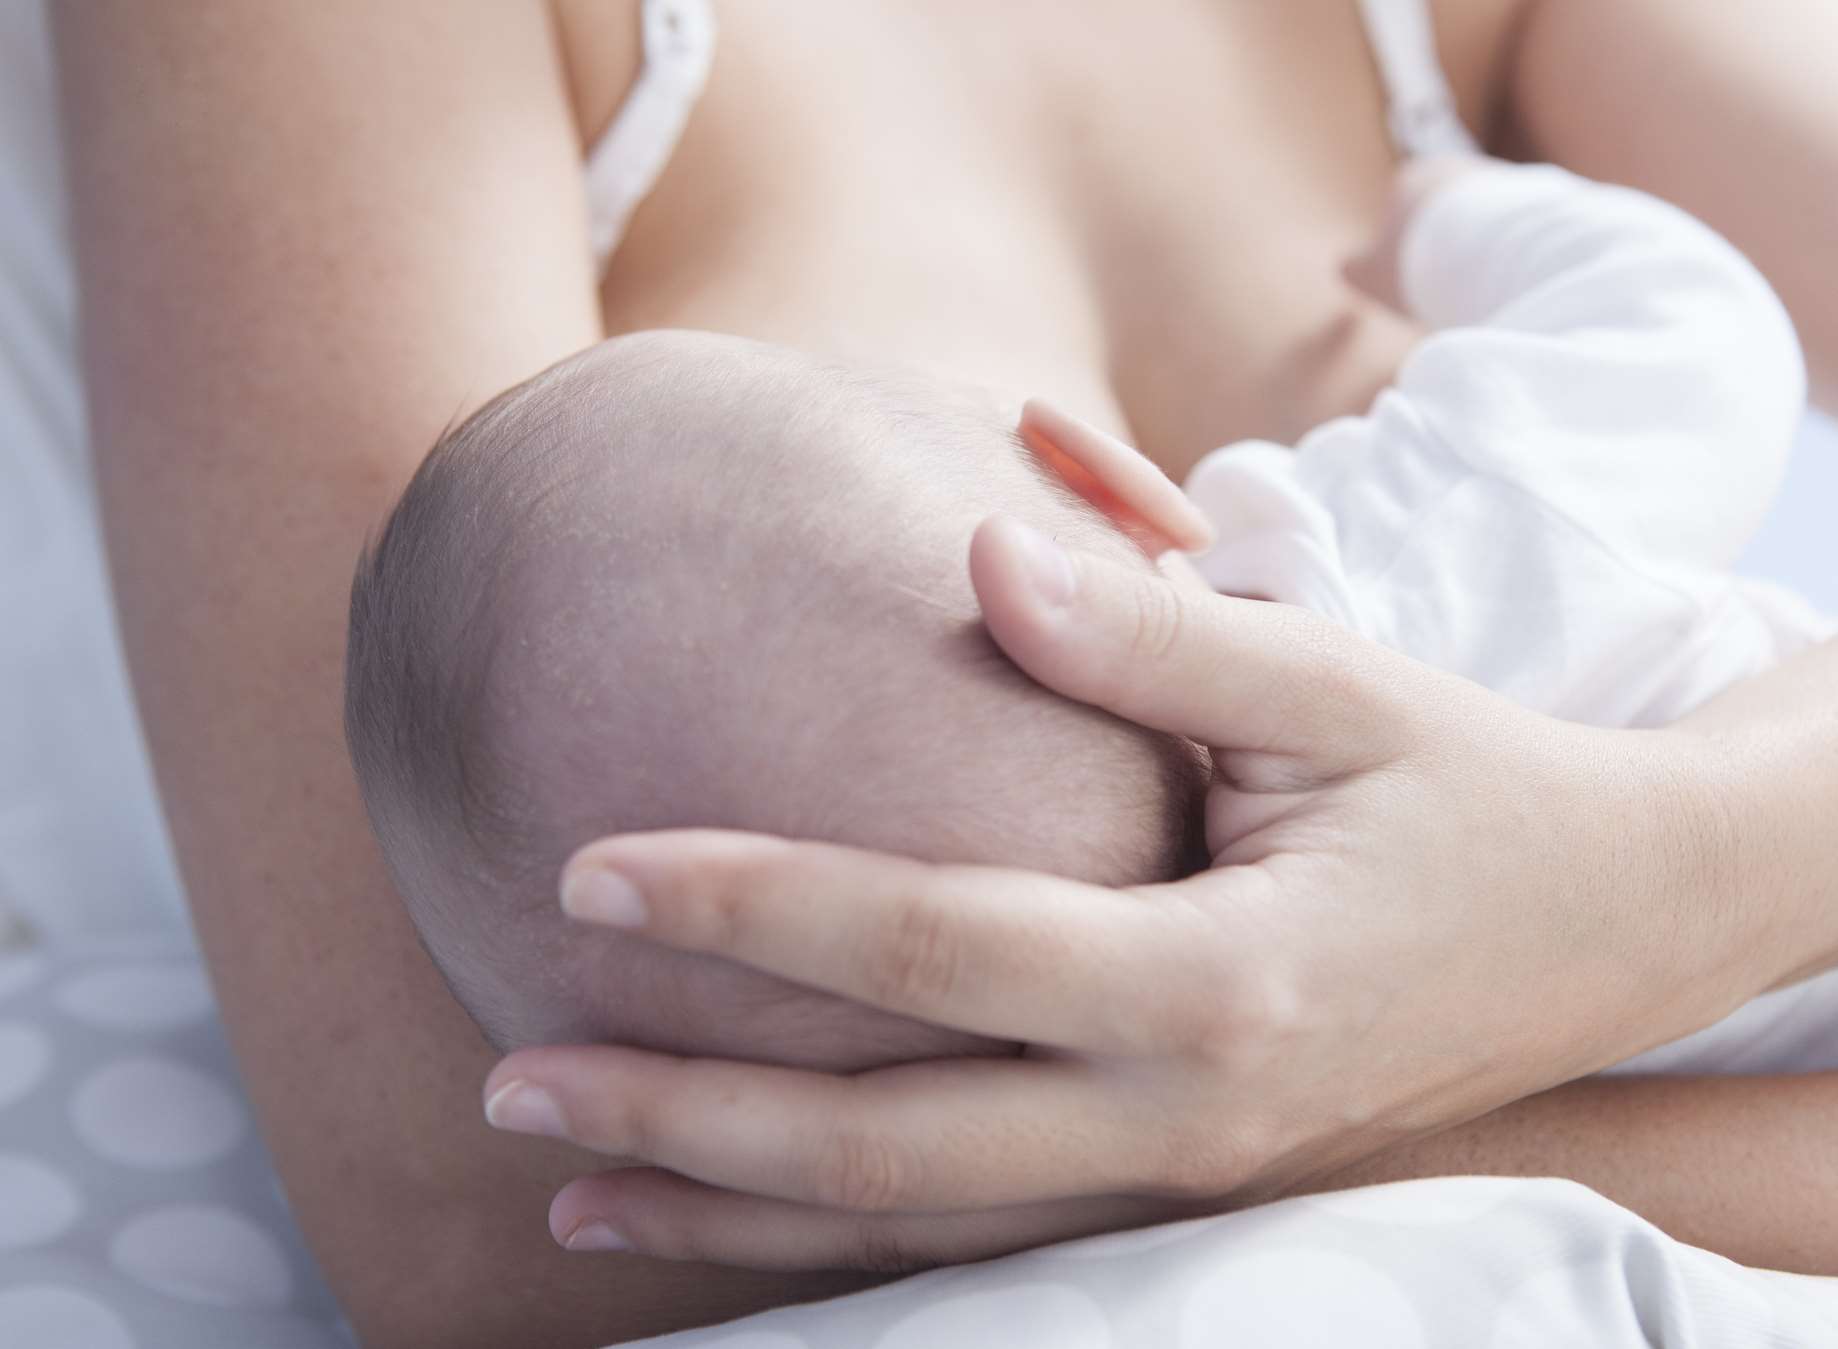 Everyone has an opinion when it comes to breastfeeding